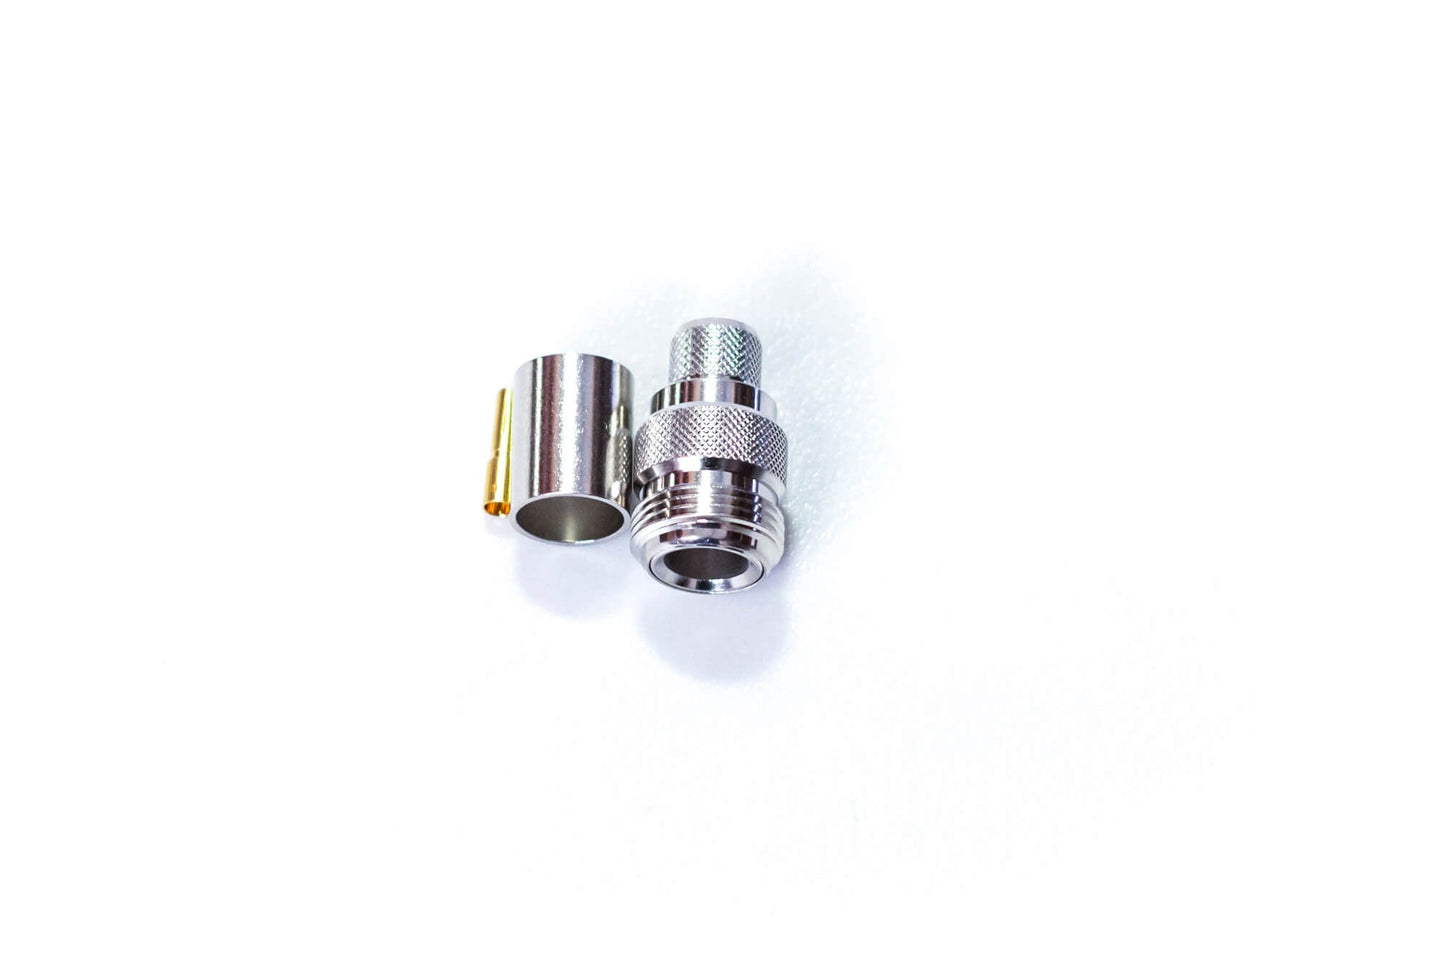 Acconet N-Type (Female) Connector for ARF400 Cable - Vice-Tech